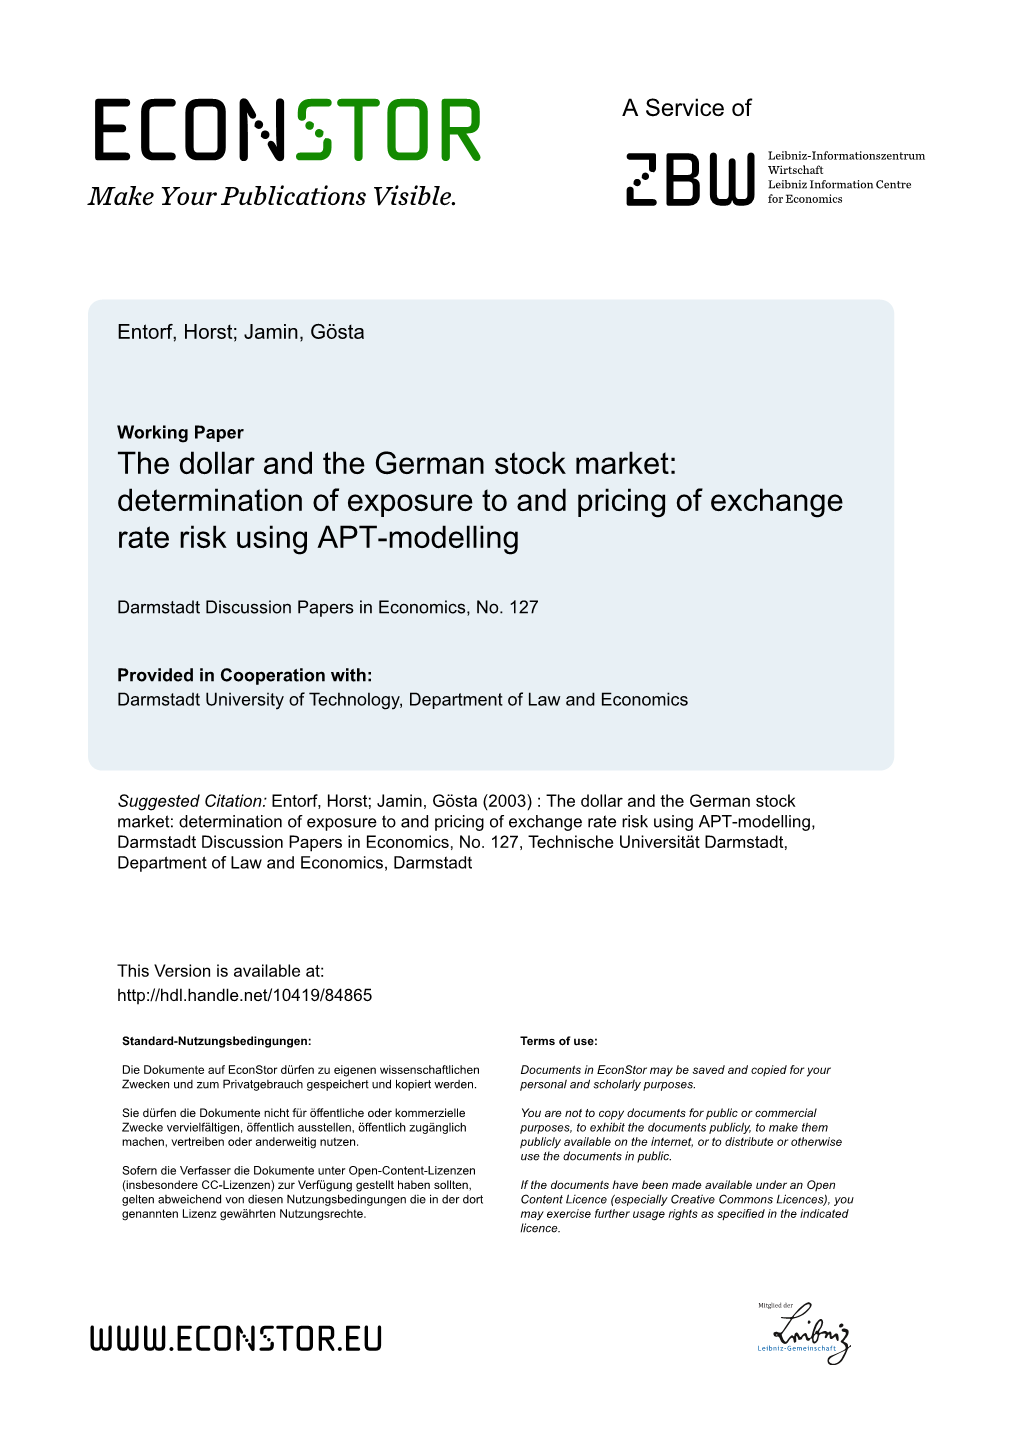 The Dollar and the German Stock Market: Determination of Exposure to and Pricing of Exchange Rate Risk Using APT-Modelling